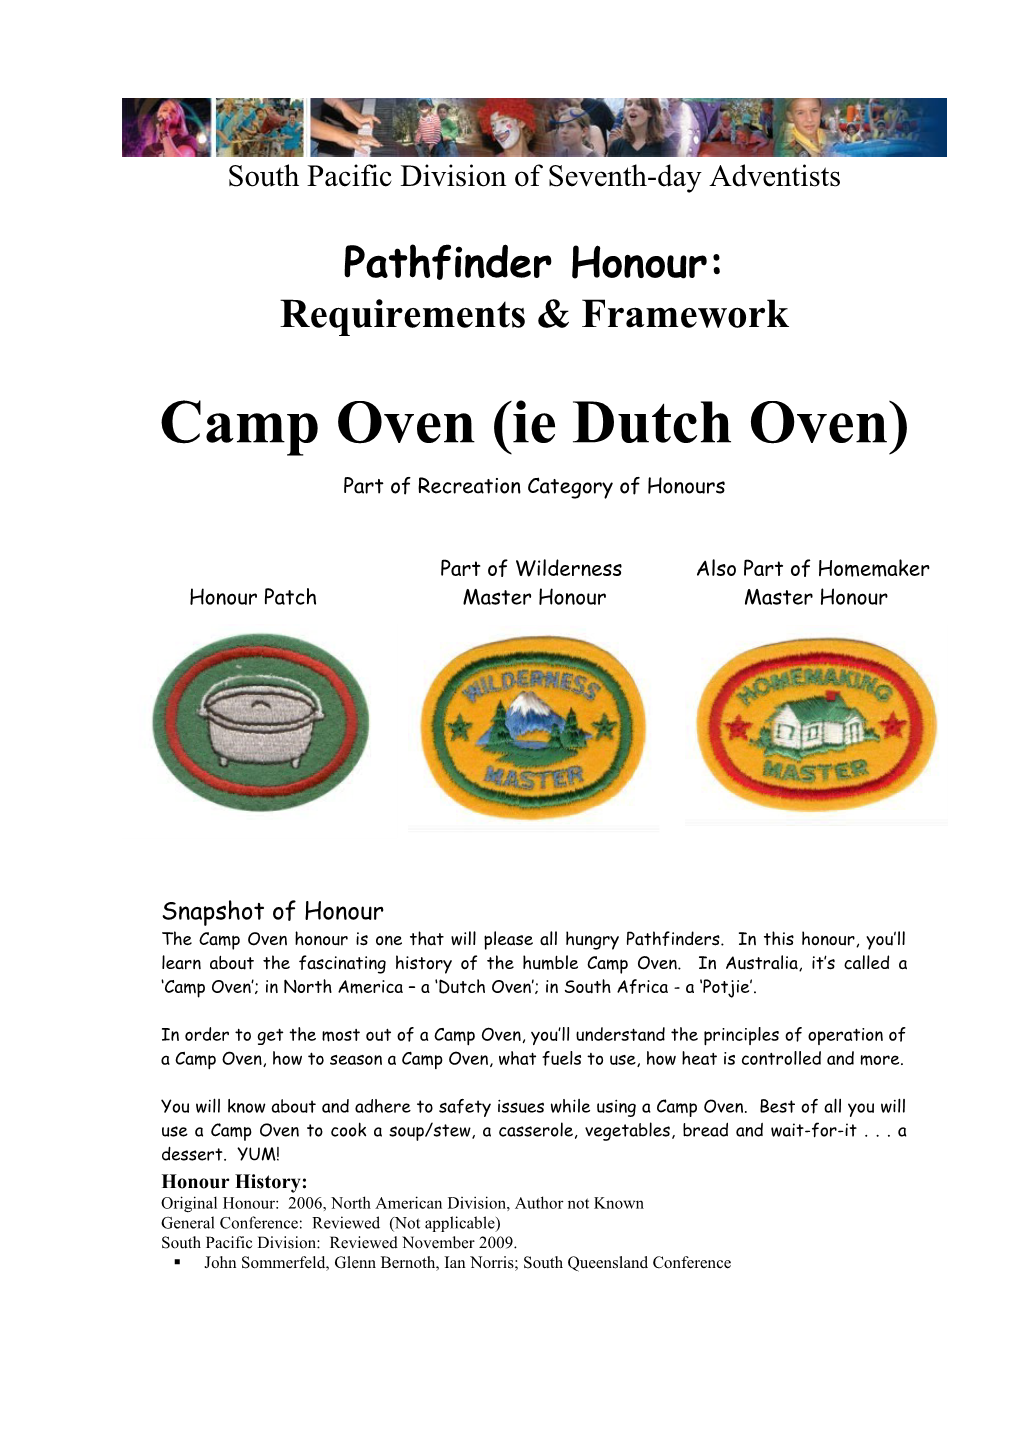 Camp Oven (Dutch Oven) Honour